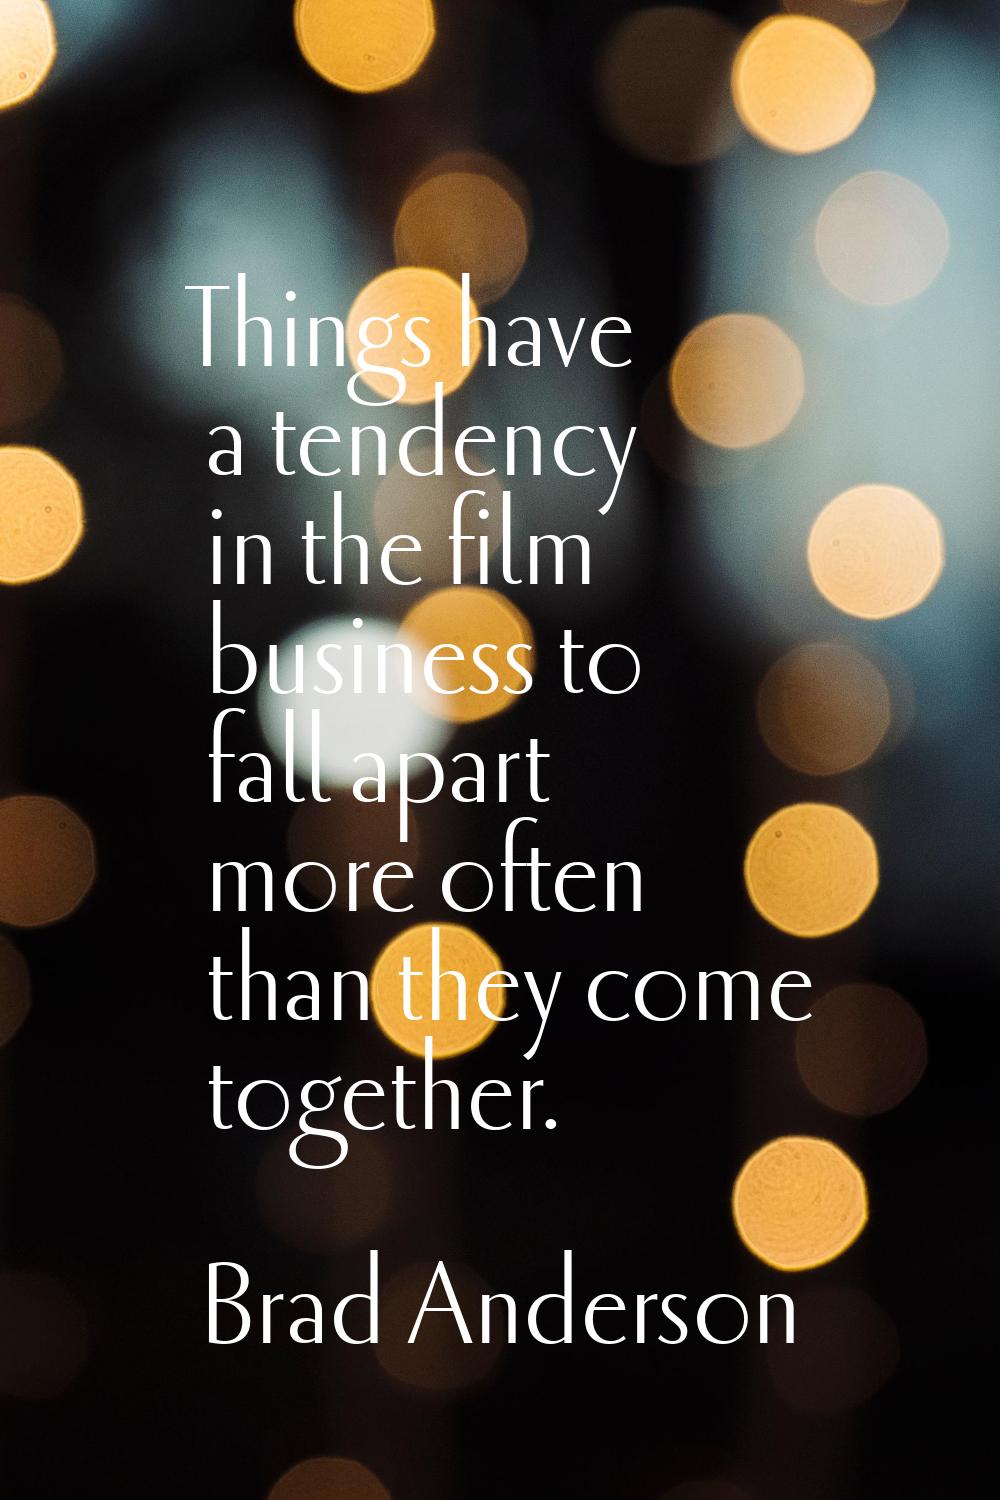 Things have a tendency in the film business to fall apart more often than they come together.